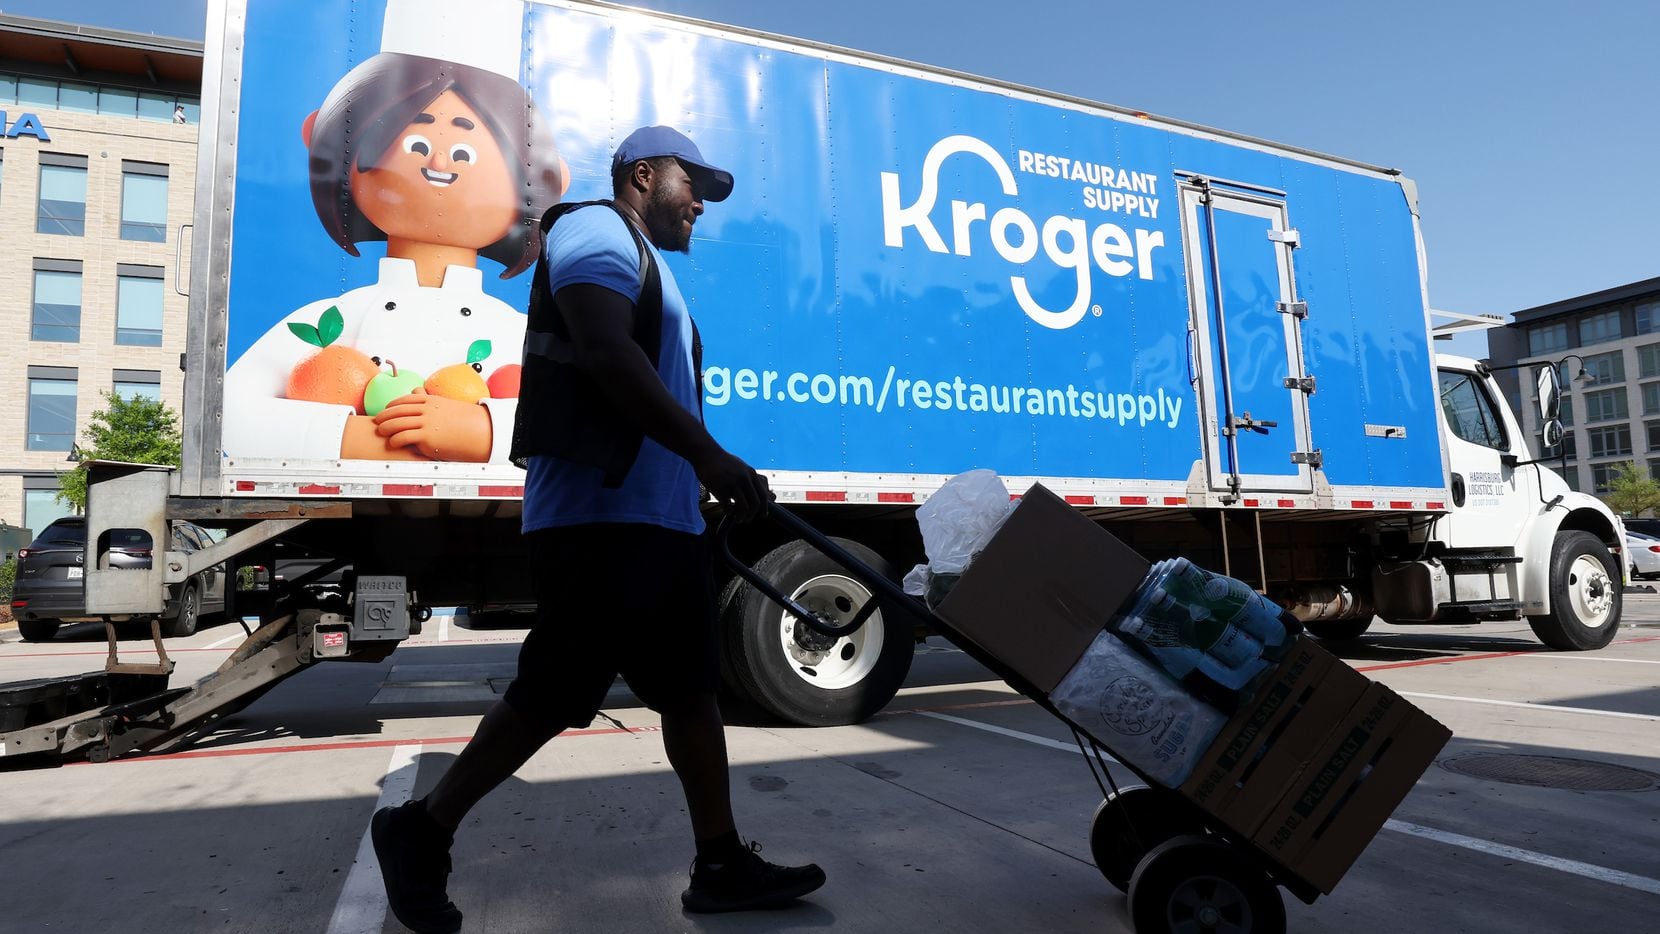 Hey Dallas restaurants, Kroger wants to be your go-to source for fresh foods